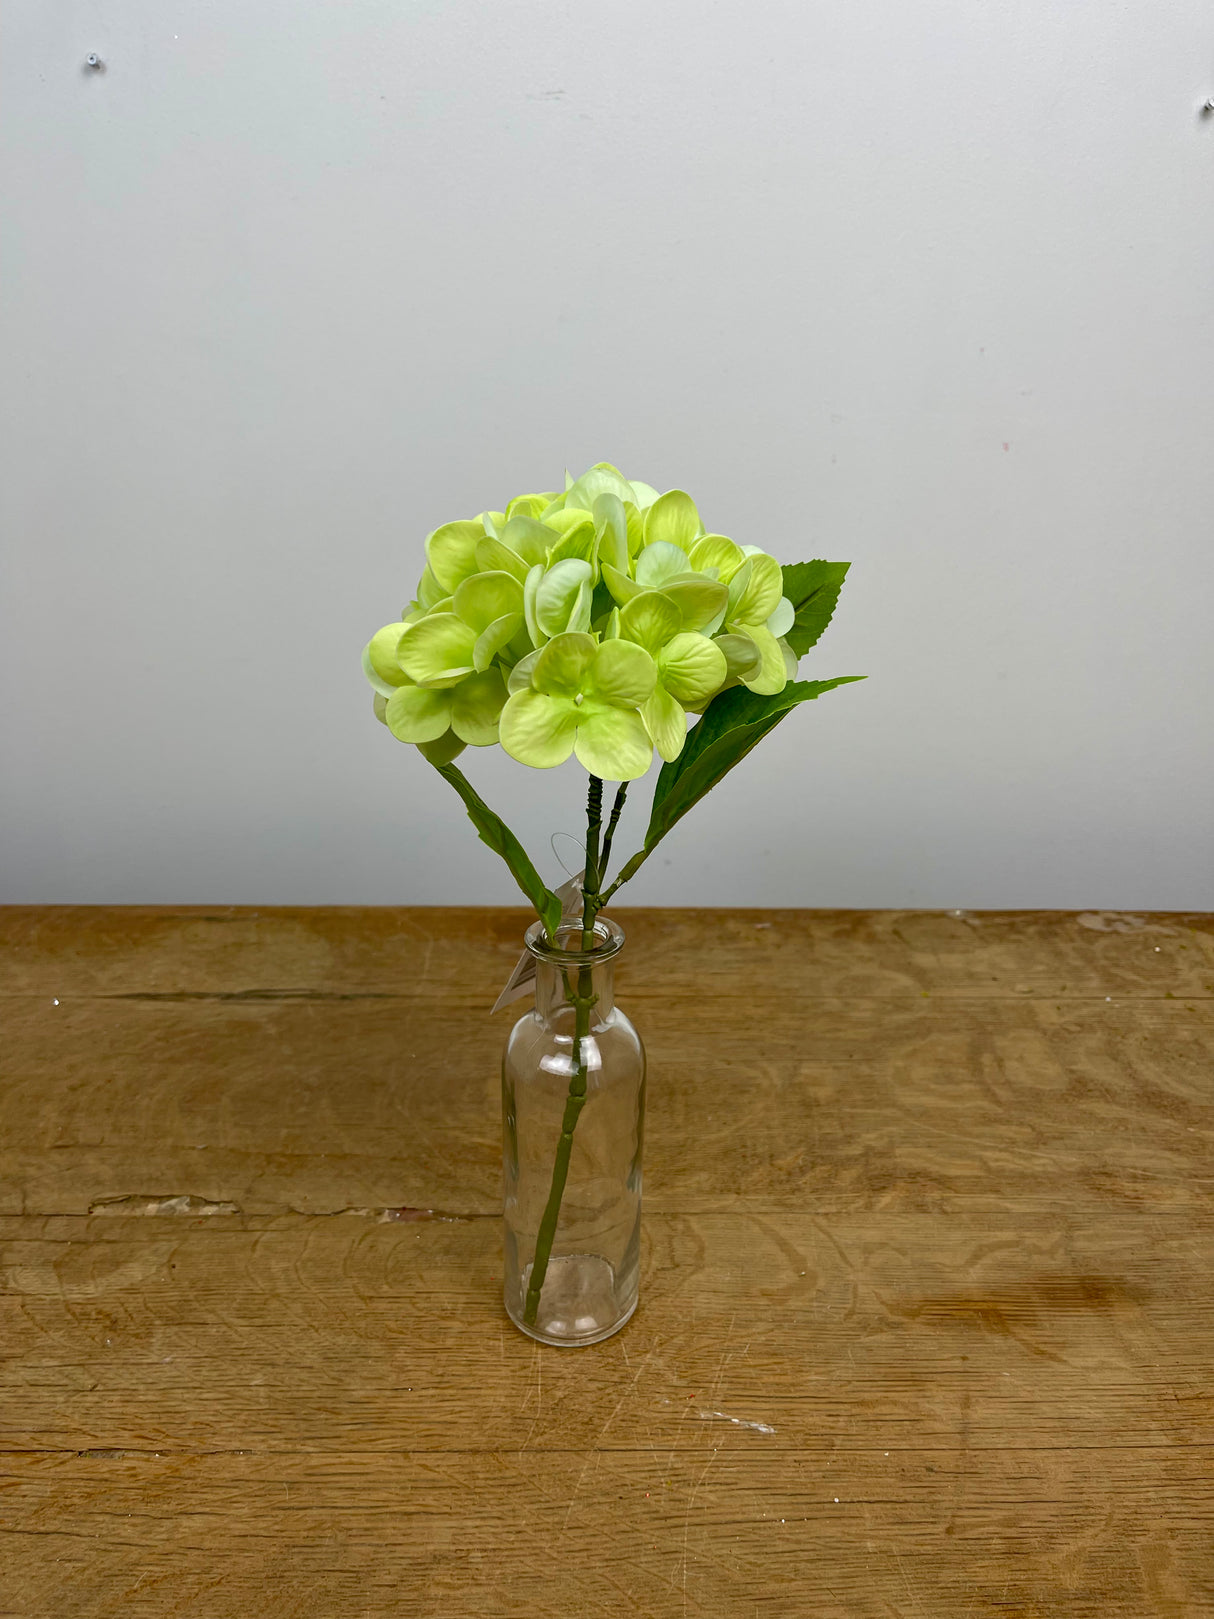 Green Real Touch Hydrangea Pick